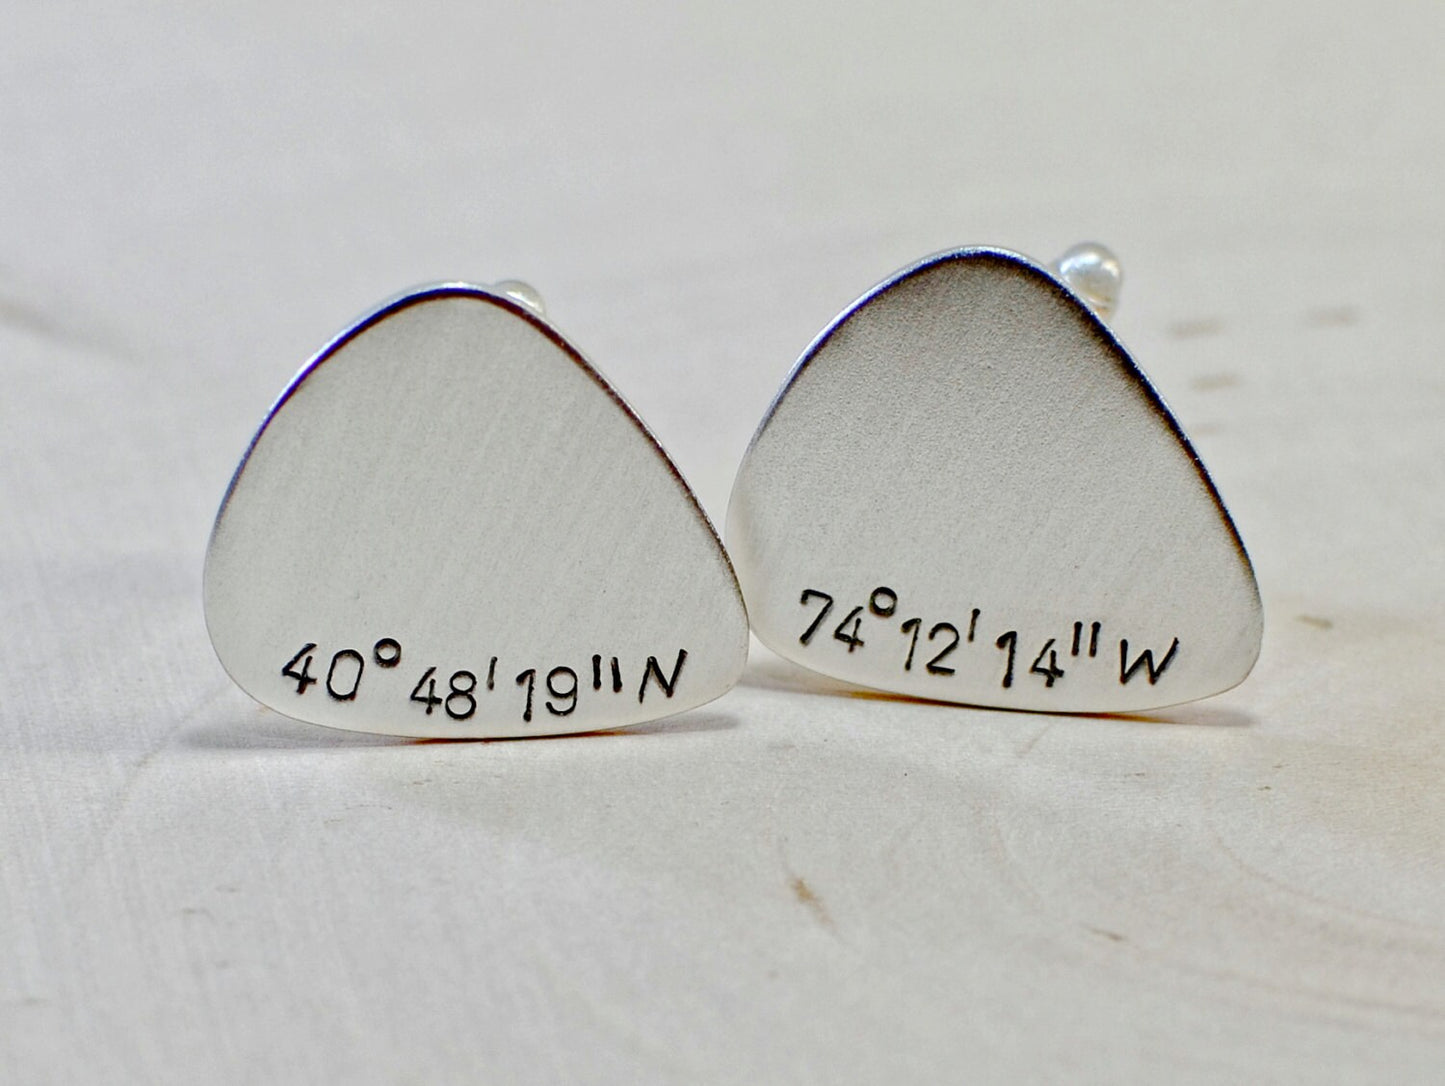 Sterling silver guitar pick cuff links with personalized latitude and longitude coordinates